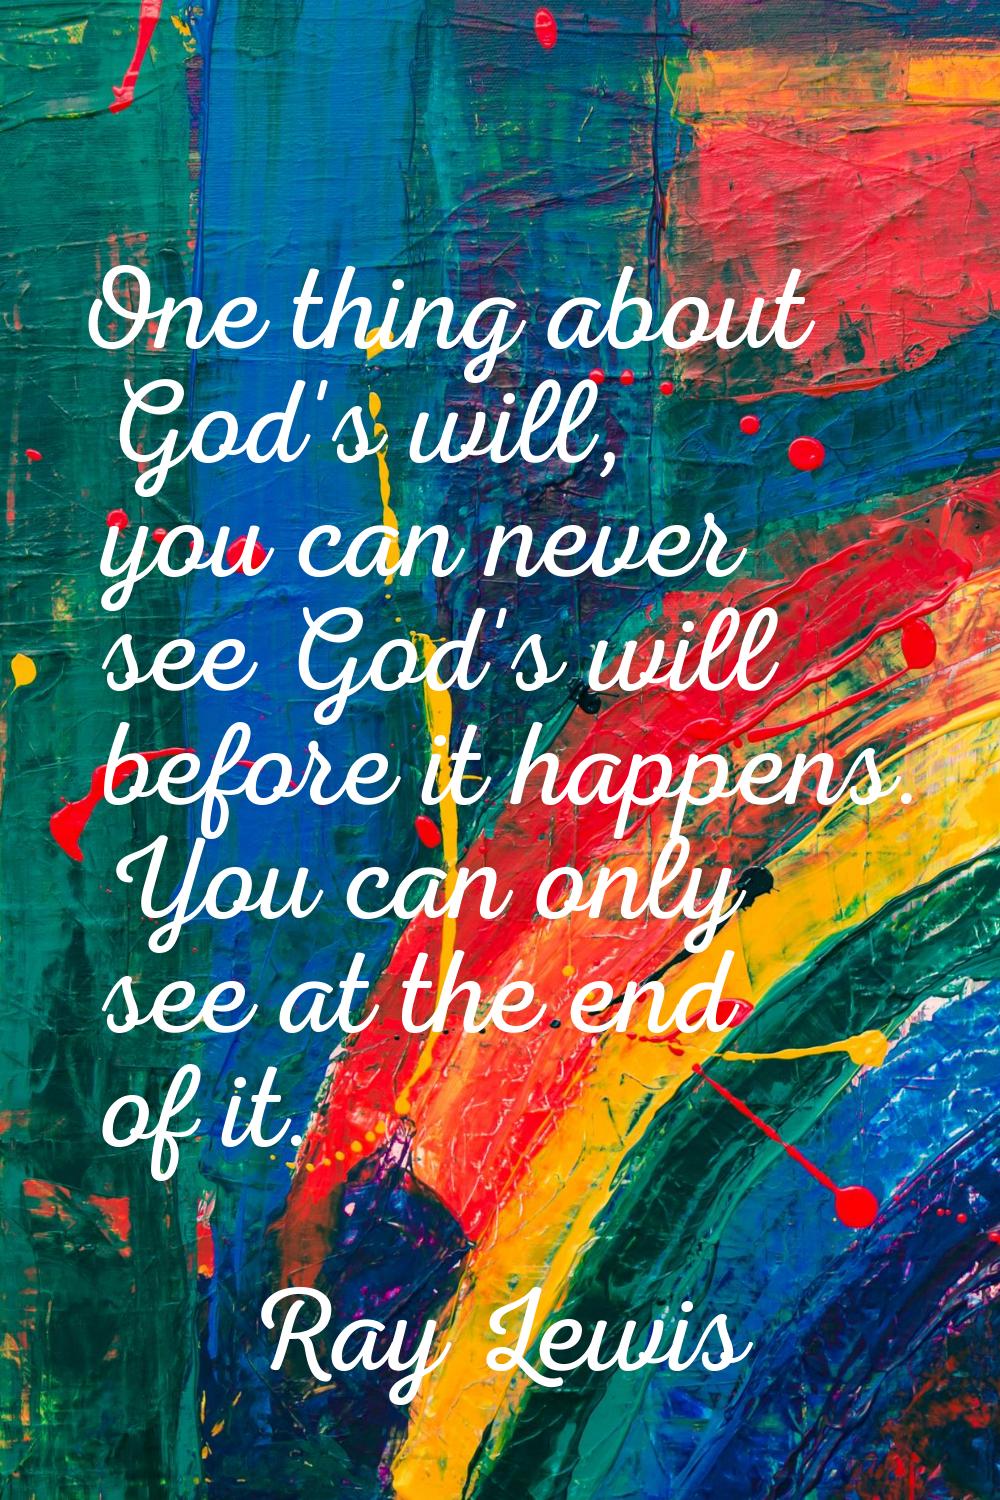 One thing about God's will, you can never see God's will before it happens. You can only see at the